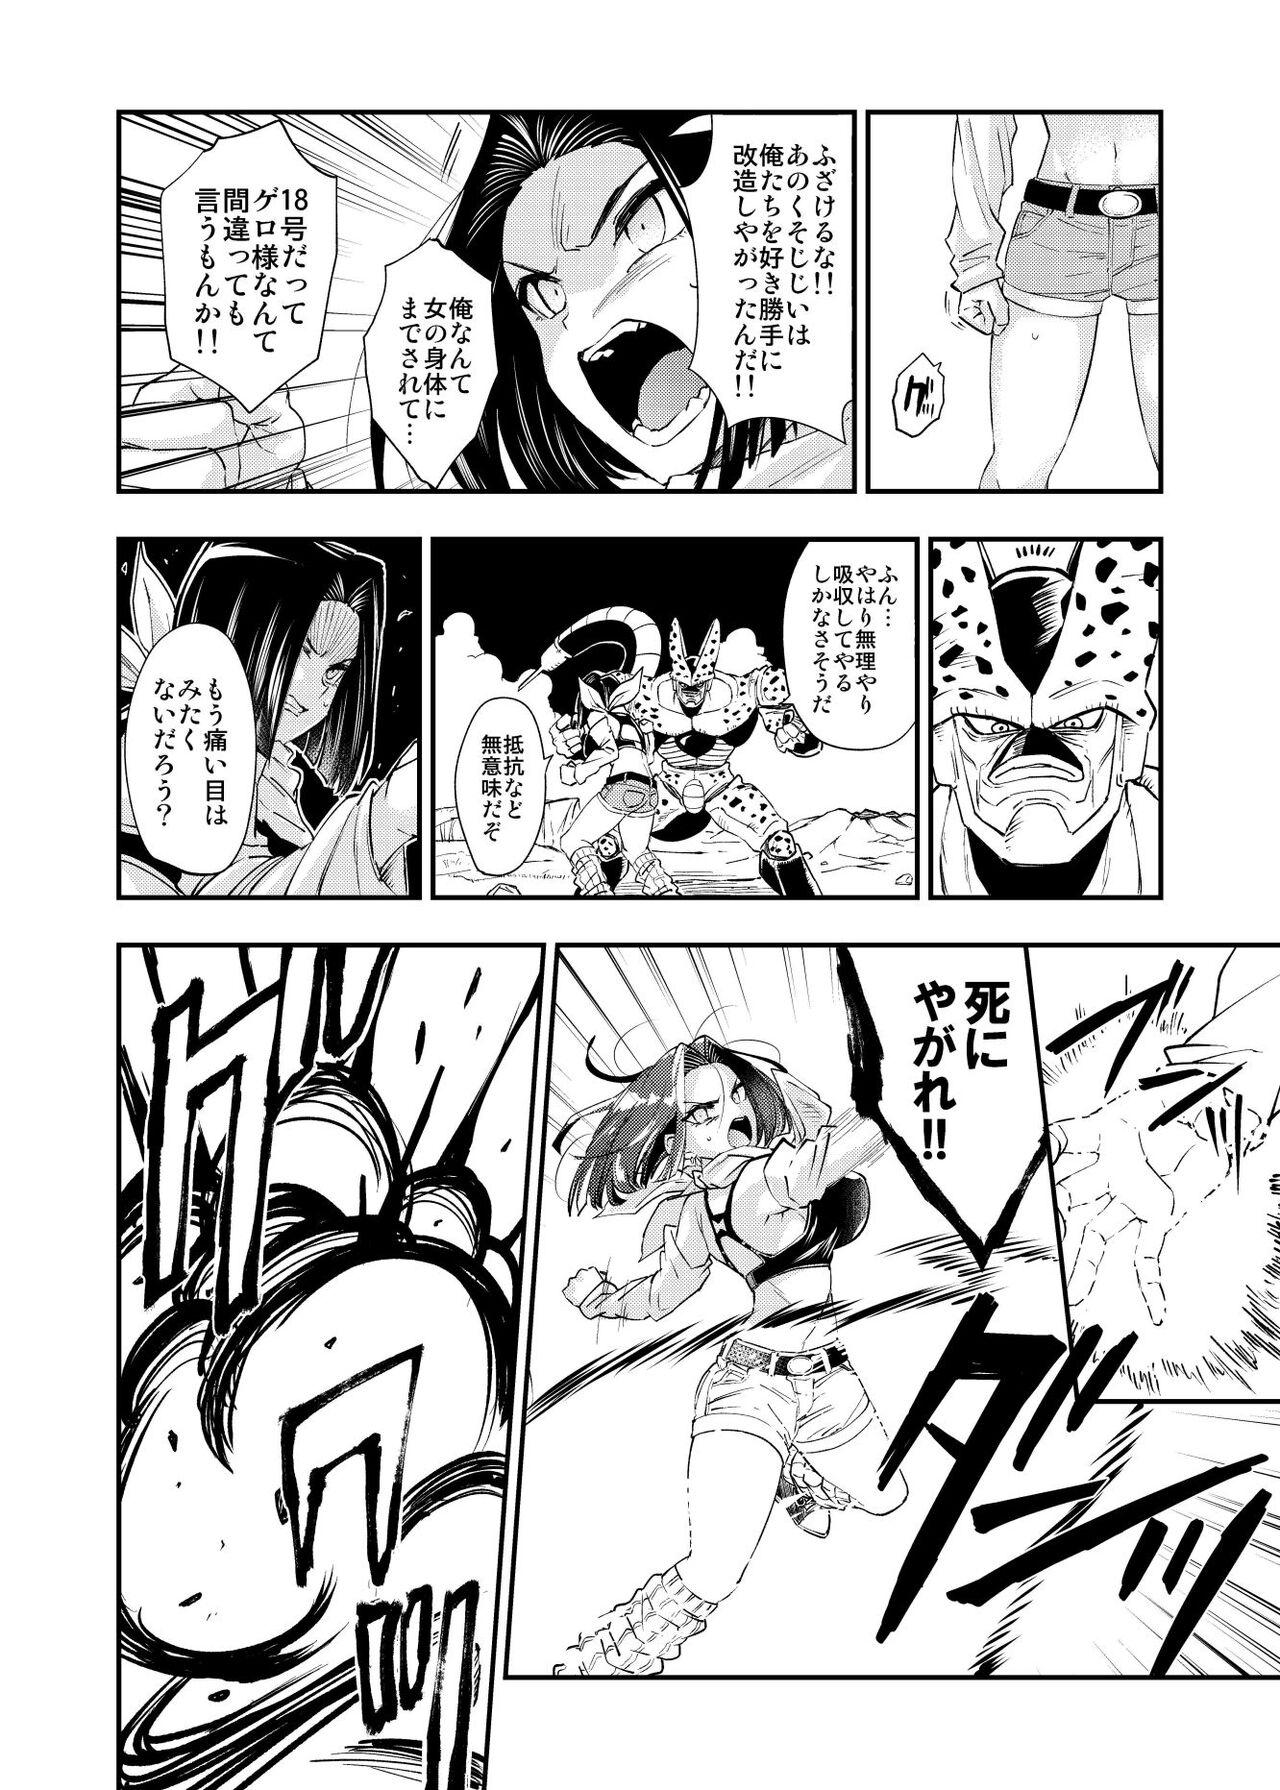 Hot Brunette Cell no Esa - Dragon ball z Perfect Teen - Page 11